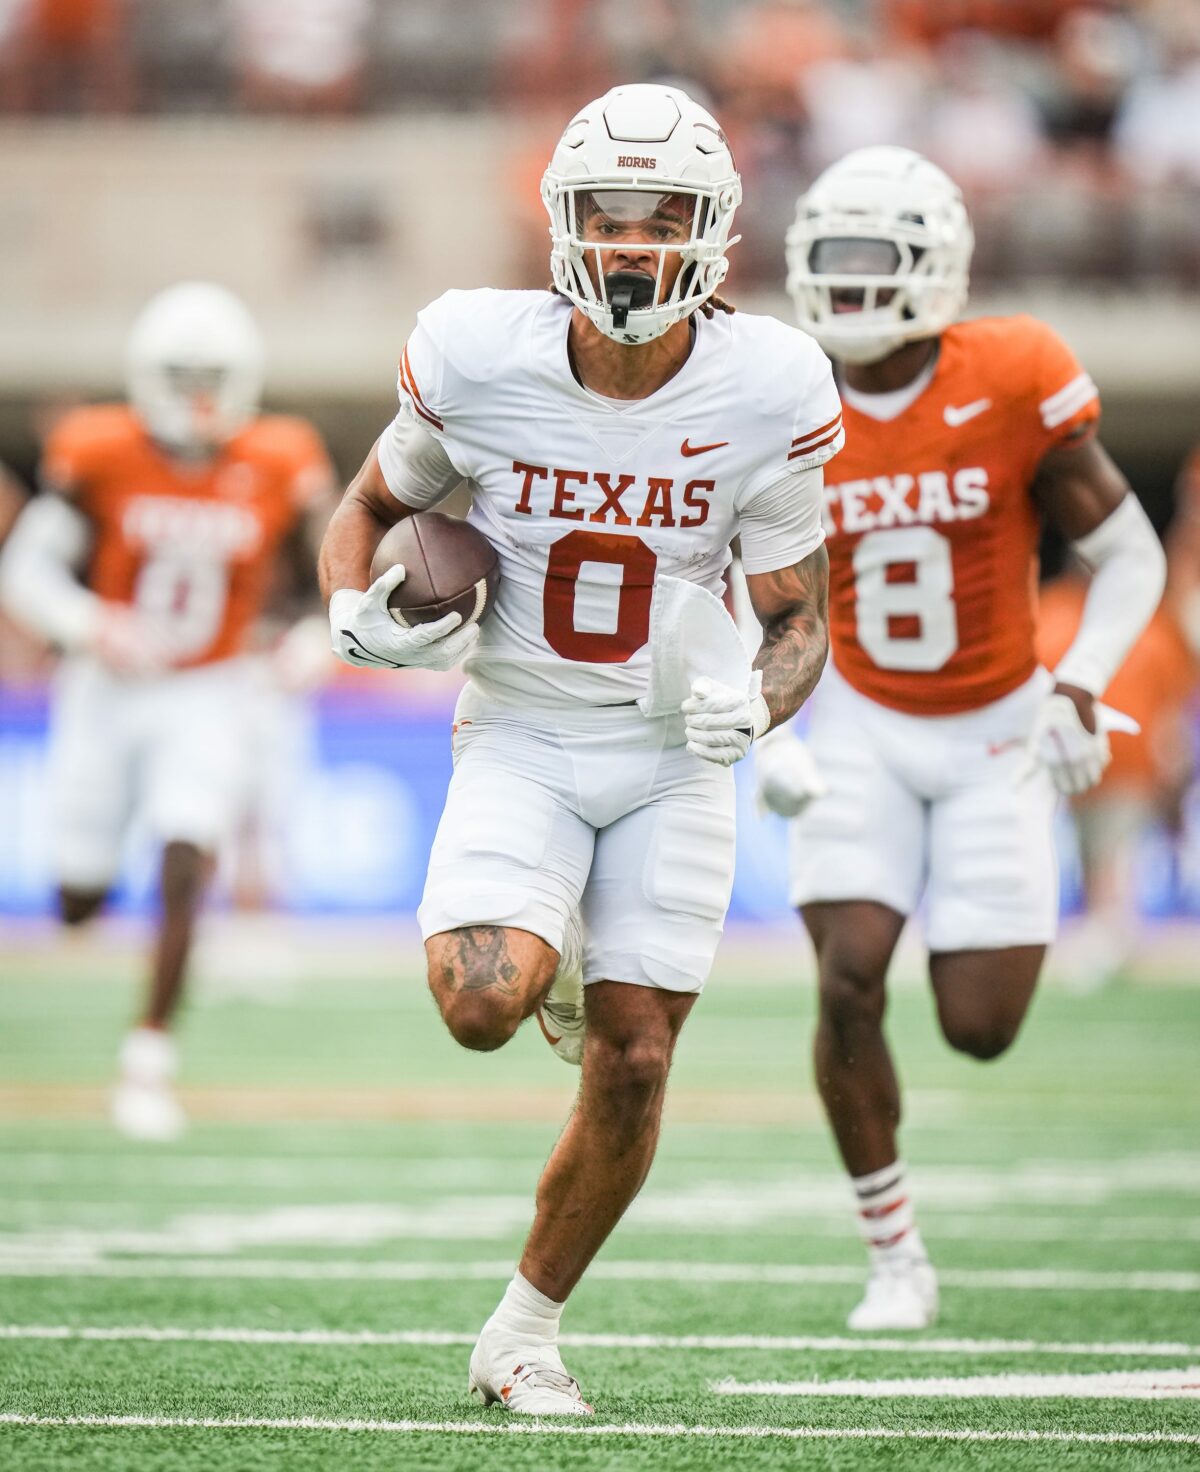 CFB analyst Gerry Hamilton says Texas has five starting receivers